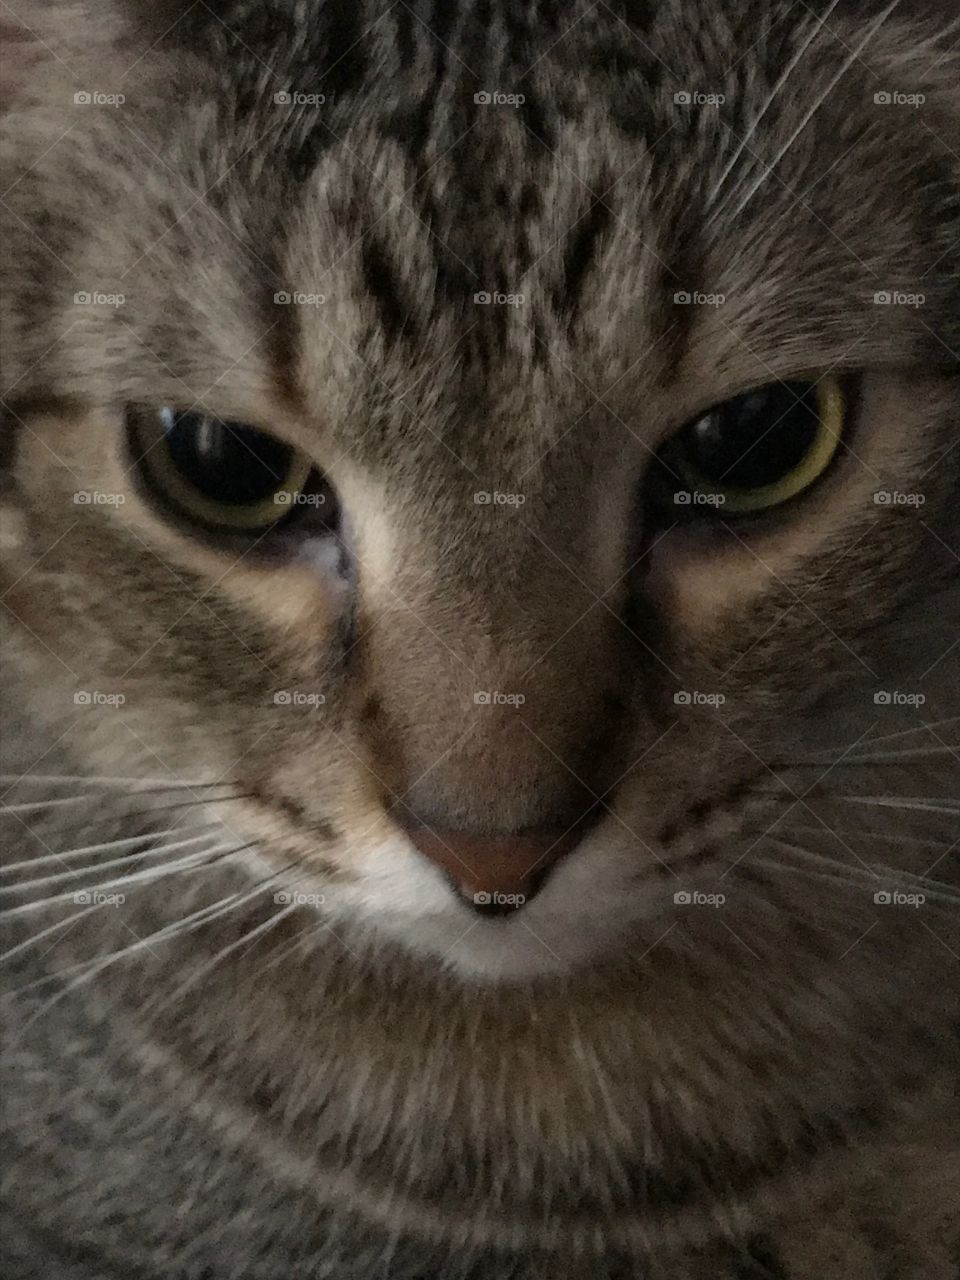 Serious Thinking Cat Face